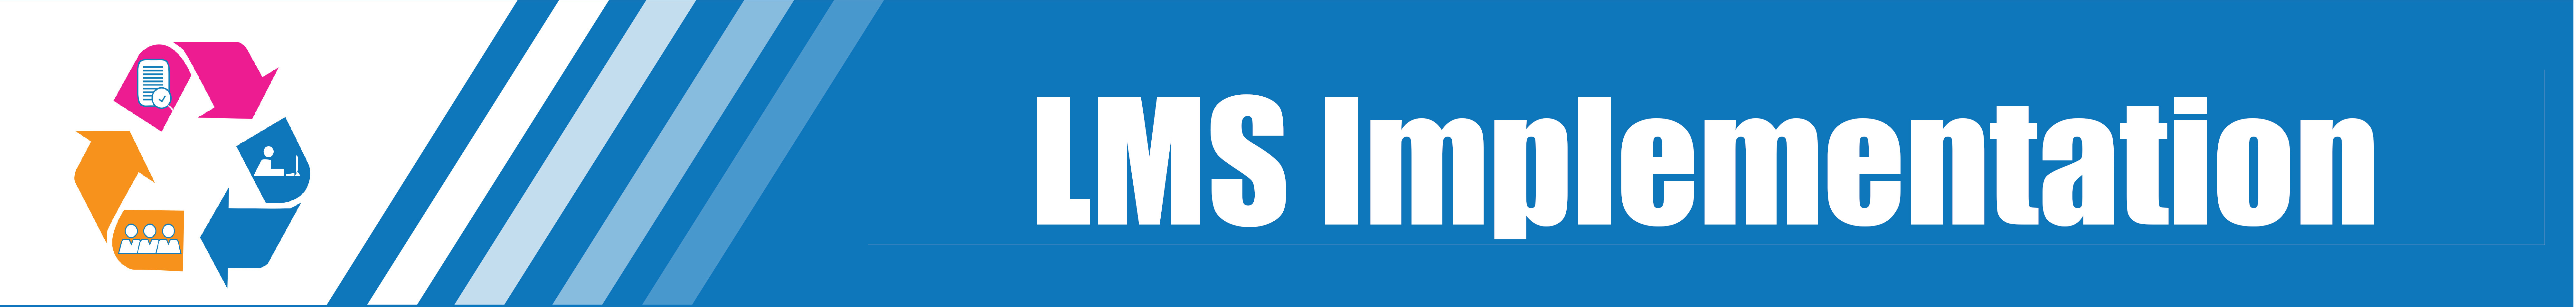 LMS review banner with recycling icon - LMS Review Project Status